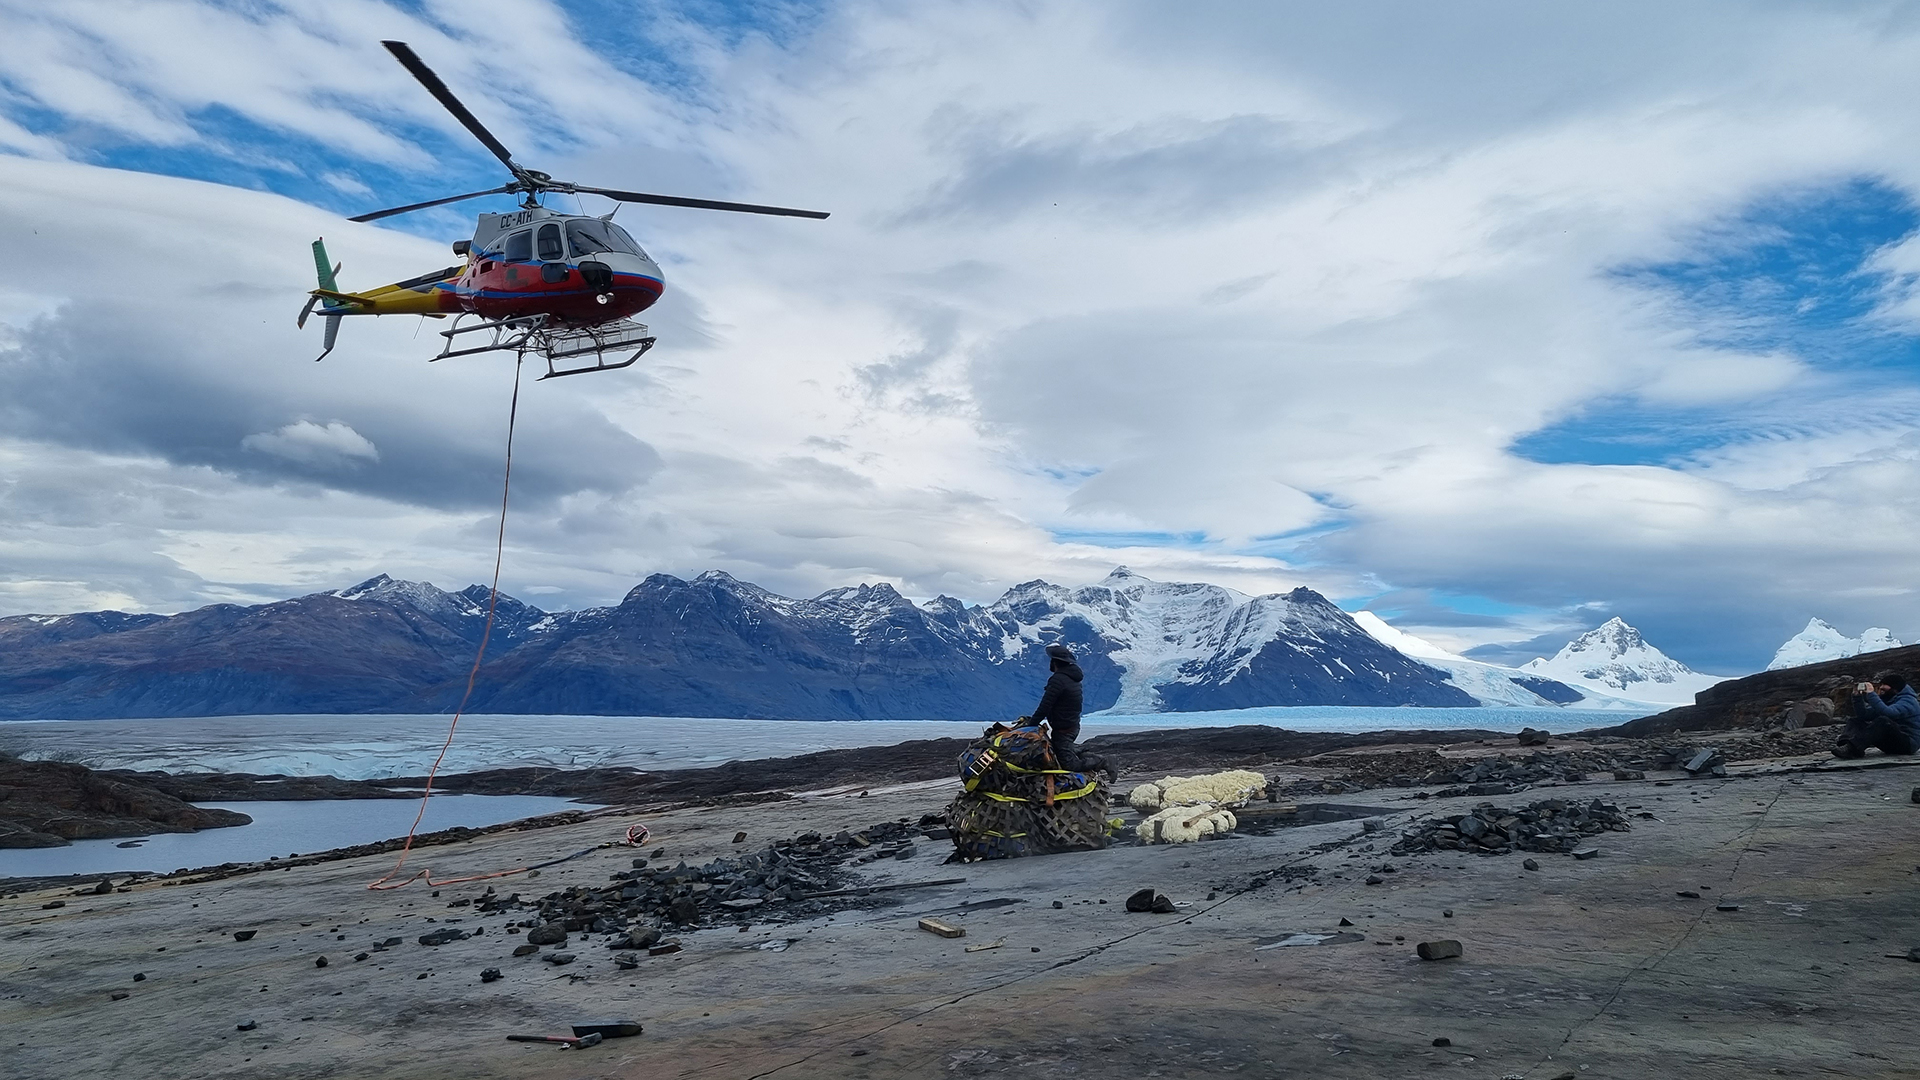 A helicopter prepares to lift the heavy ichthyosaur load, in front of the Tyndall Glacier.